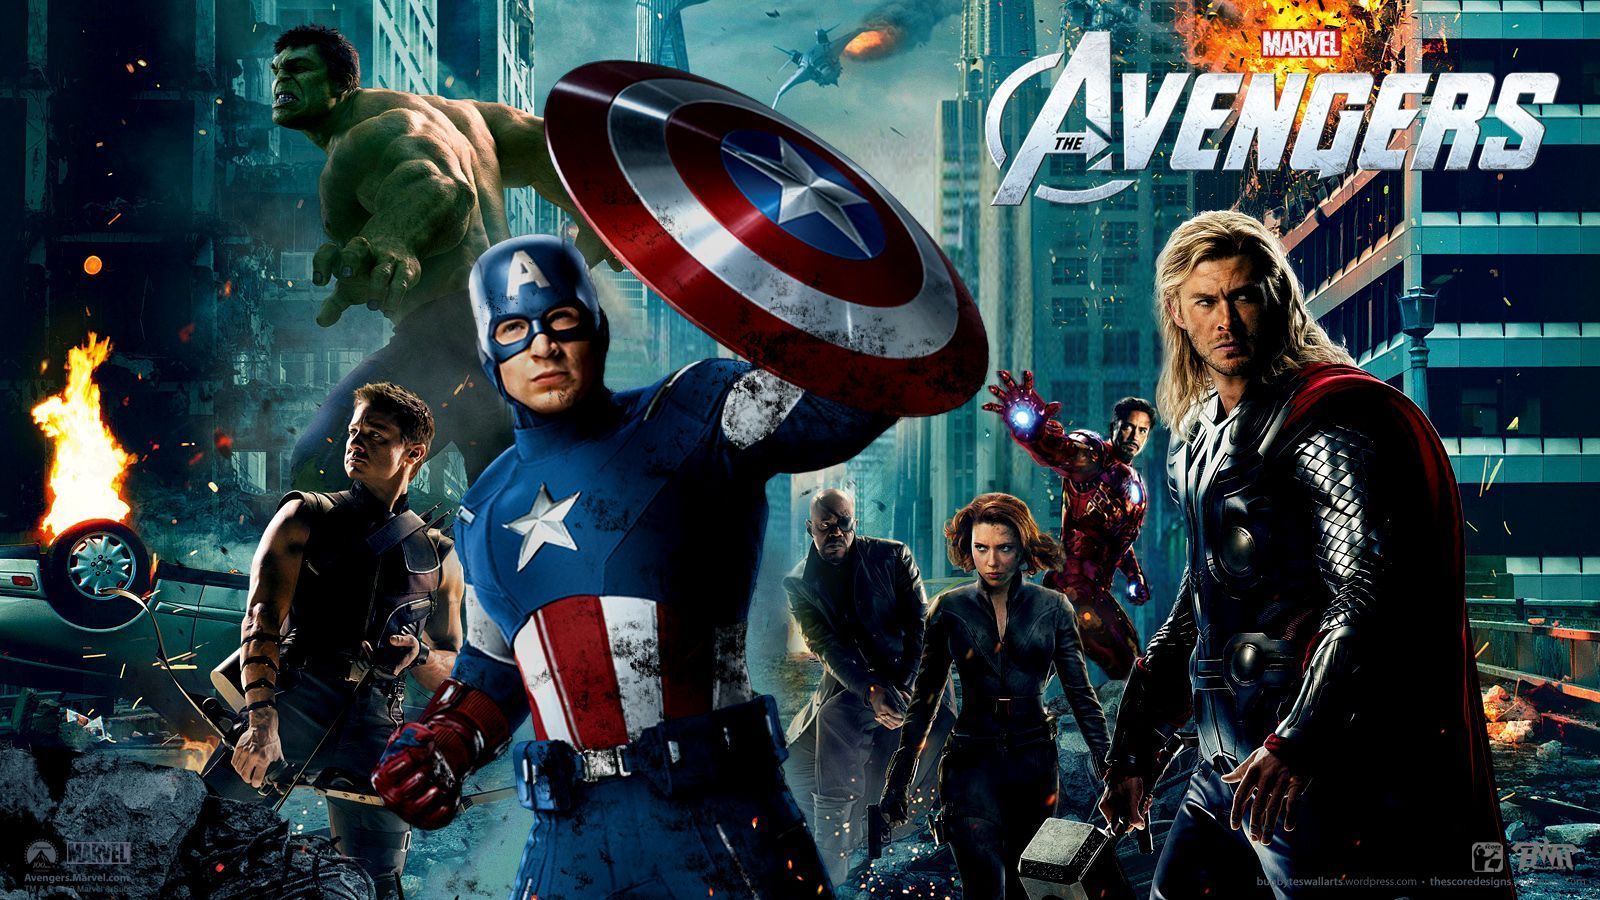 Avengers Hollywood Best Movie HD Wallpapers 2015 - All HD Wallpapers